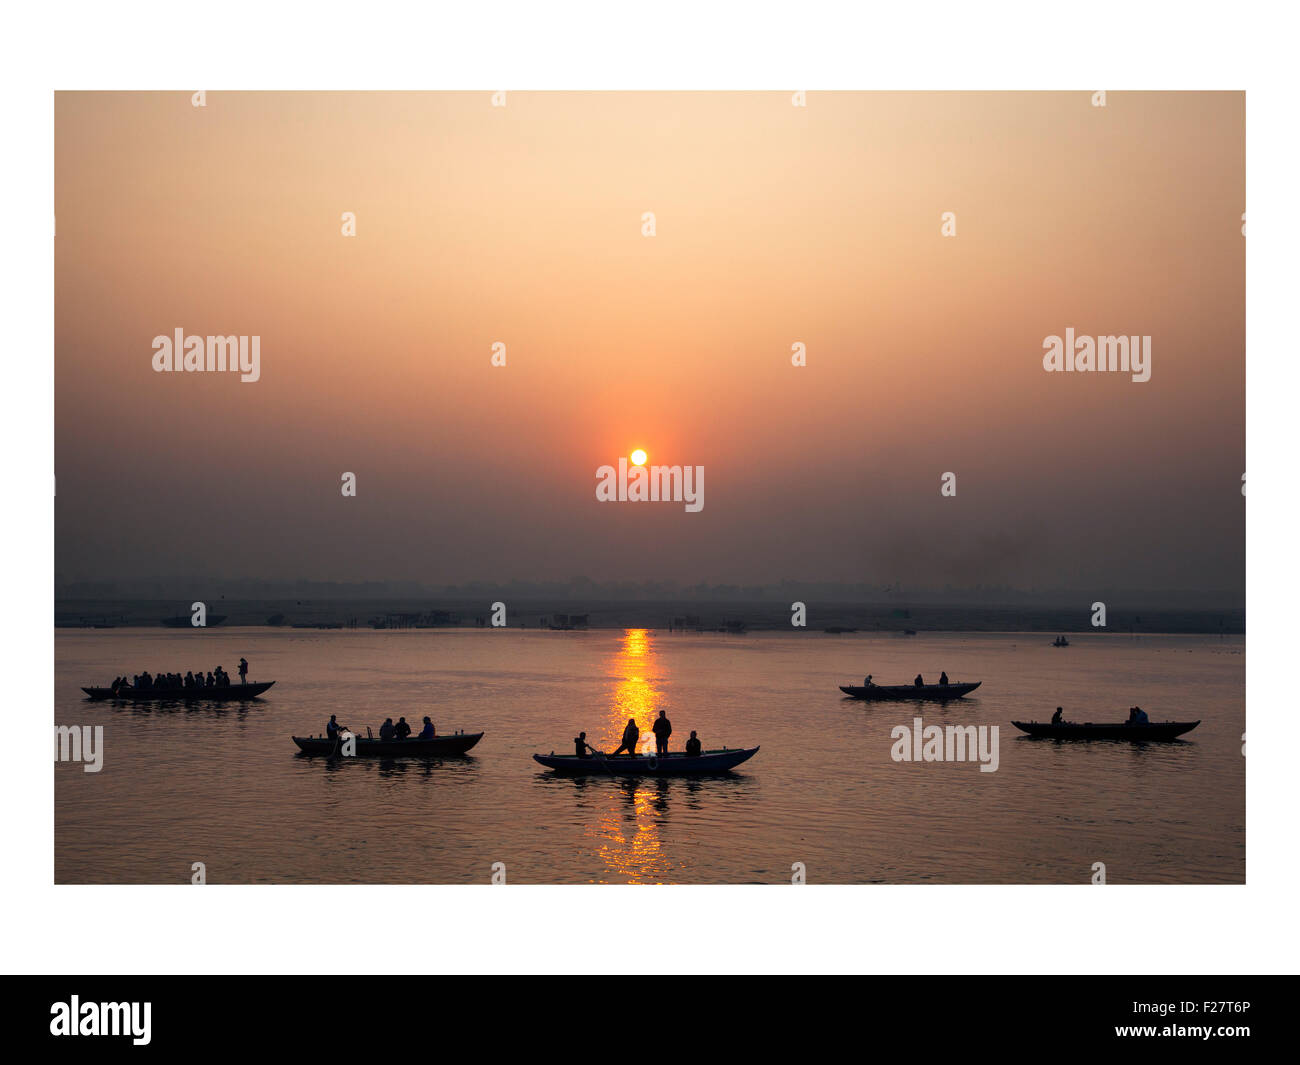 Boats float down the Ganges River in Varanasi, India at sunrise. Stock Photo